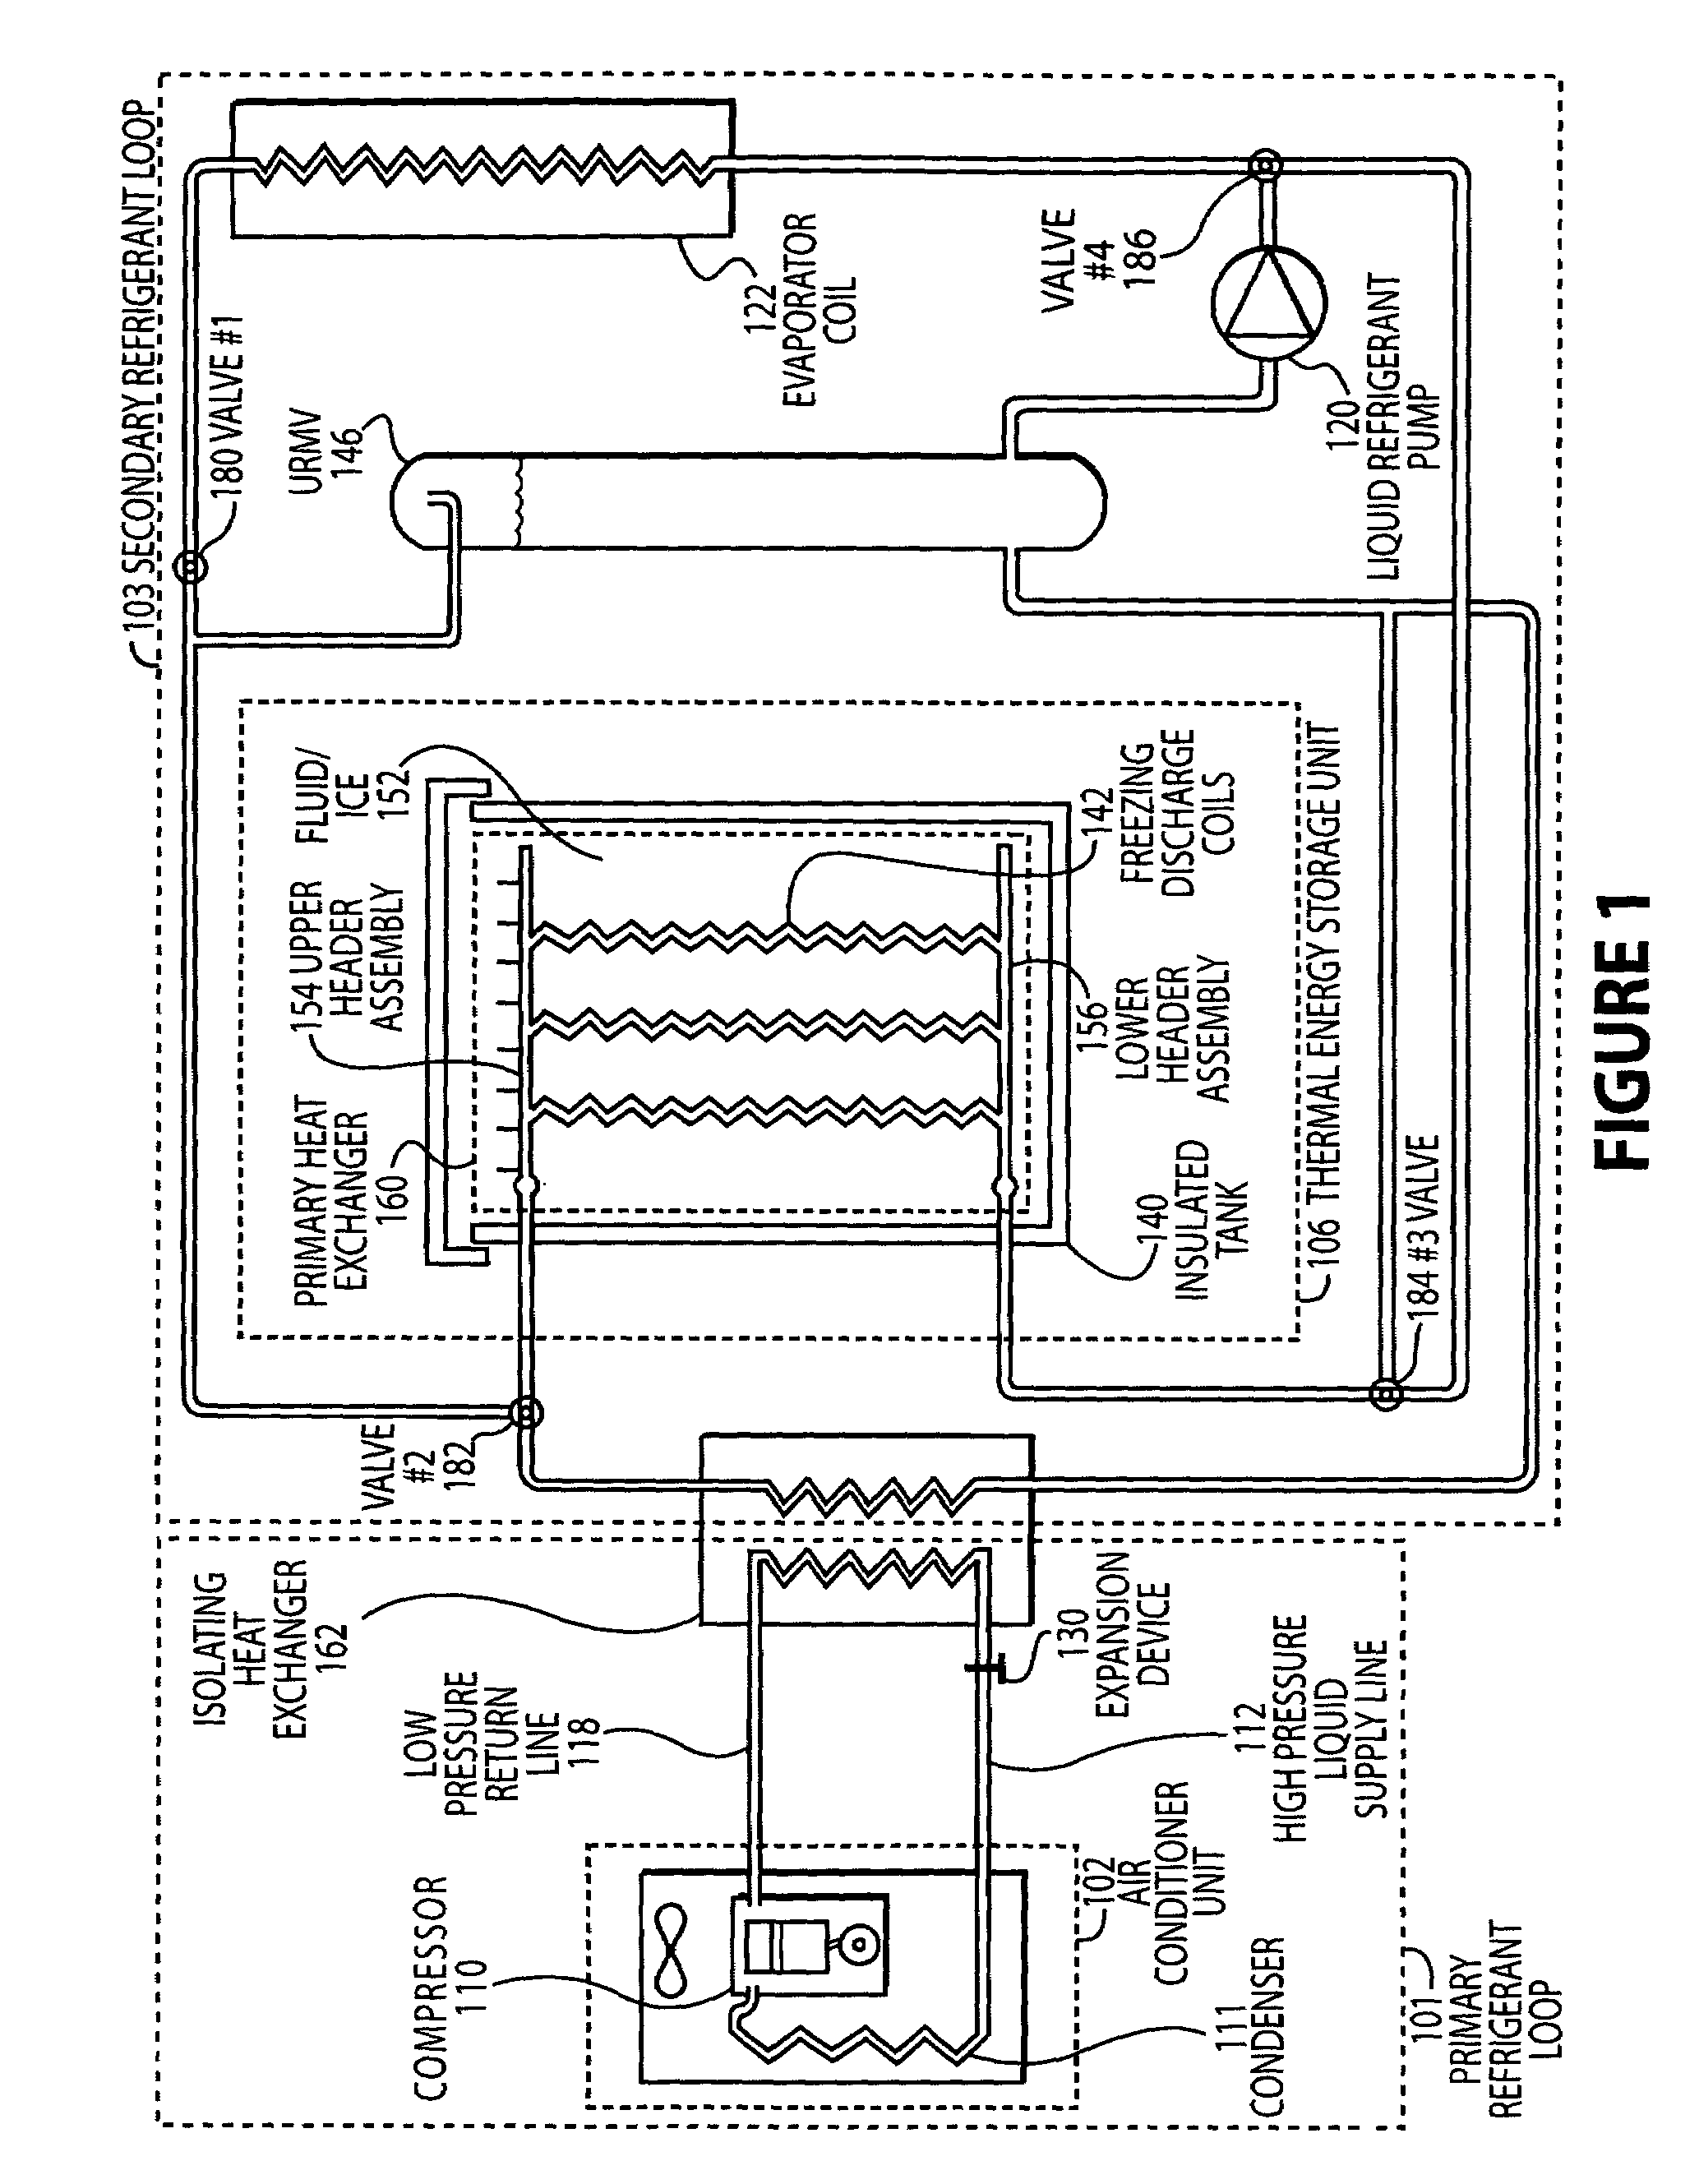 Thermal energy storage and cooling system with secondary refrigerant isolation